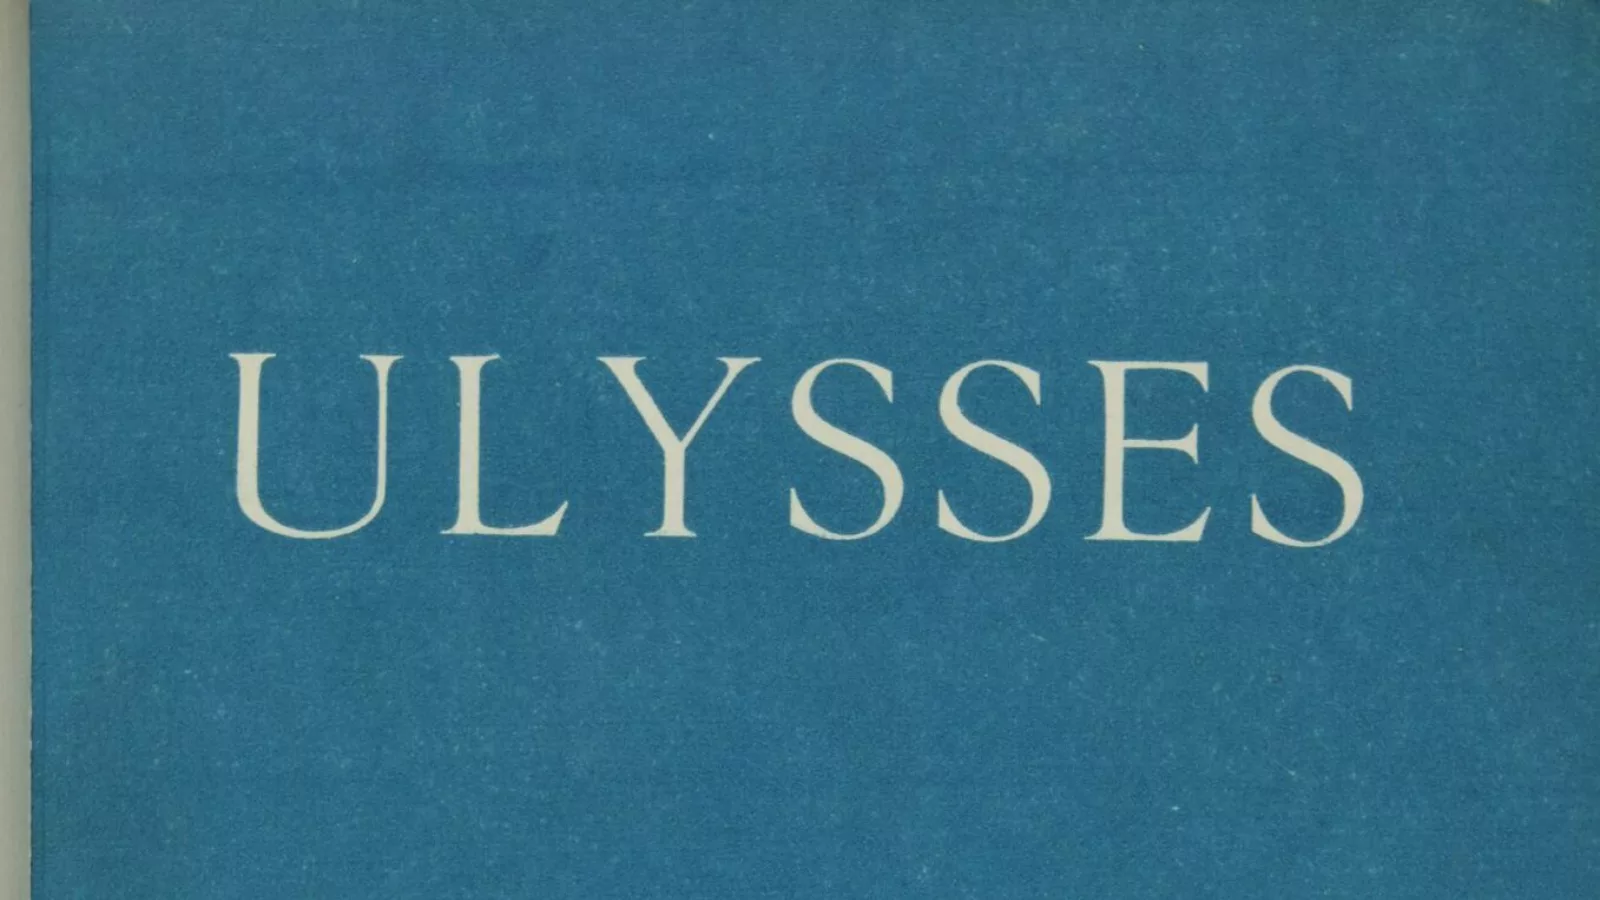 Ulysses first edition